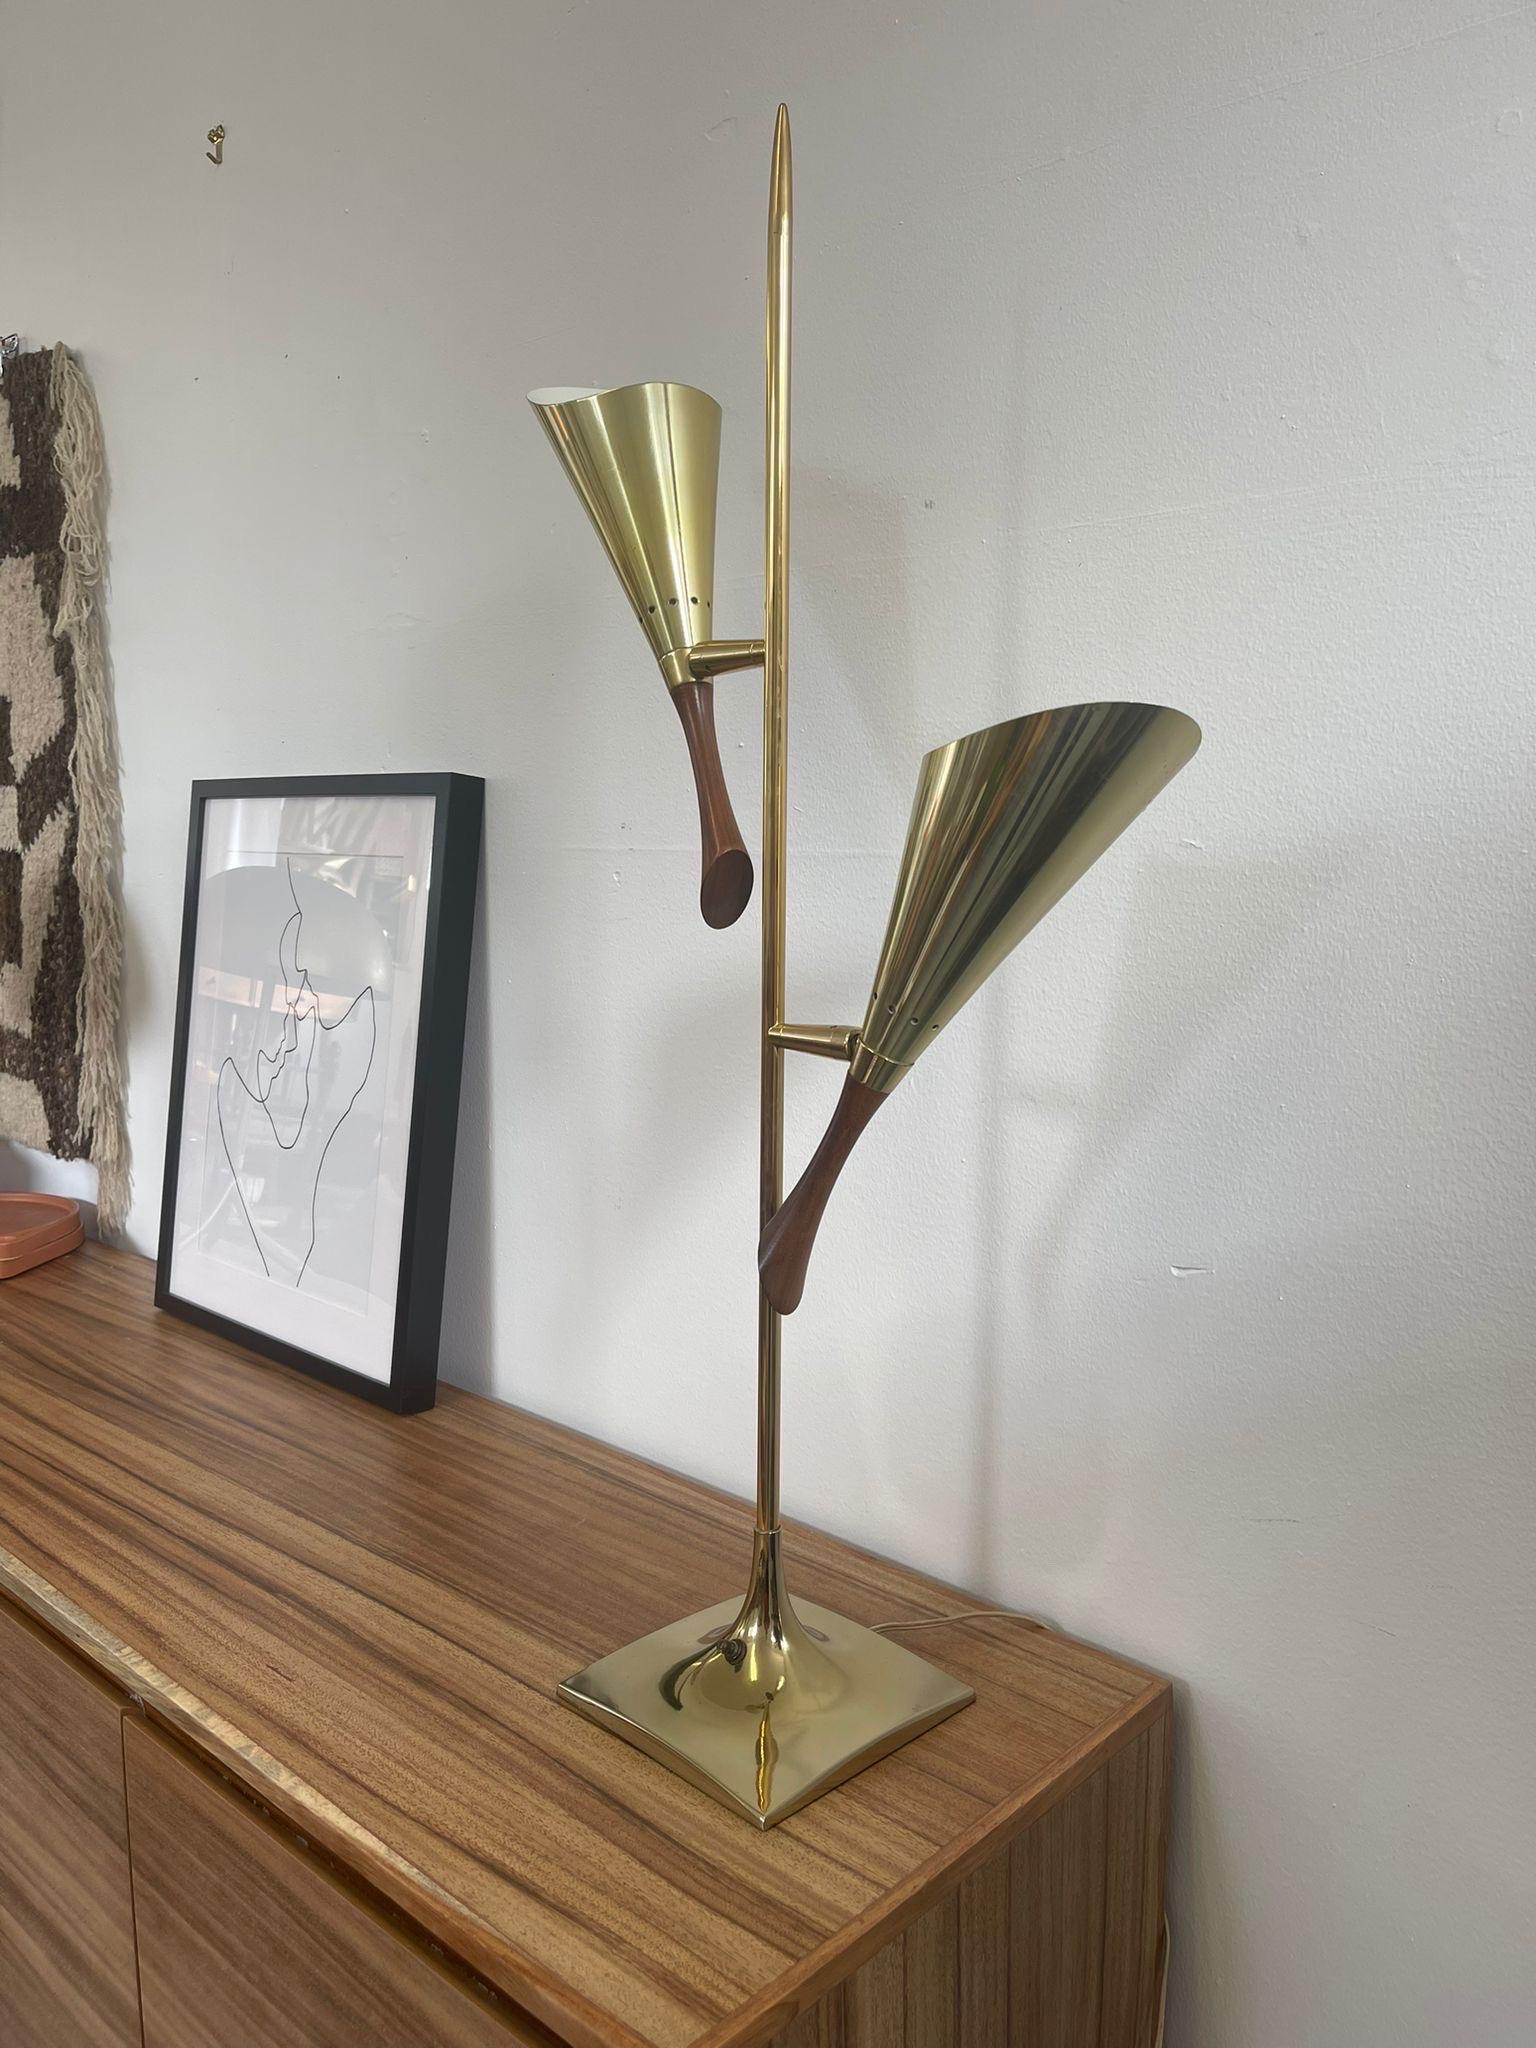 Table Lamp with Adjustable Arms. Possibly Brass. Circa 1960s. Both Lights are Functional. Light Bulb not Included.

Dimensions. 14 W ; 8 D ; 34 H.